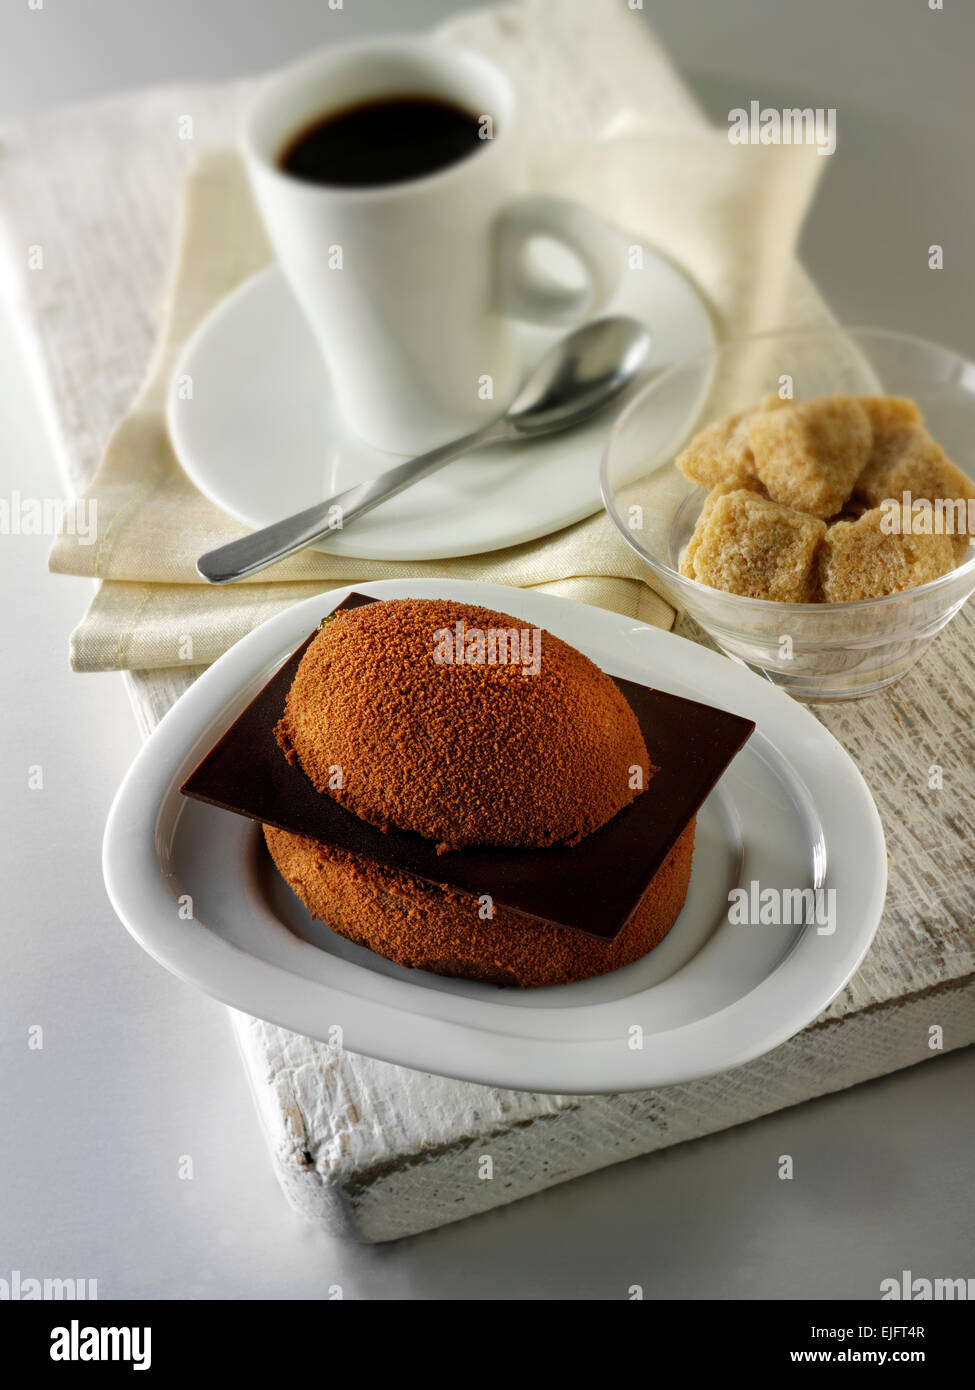 Chocolate cakes with a sponge case and chocolate filling, covered with cocoa powder Stock Photo